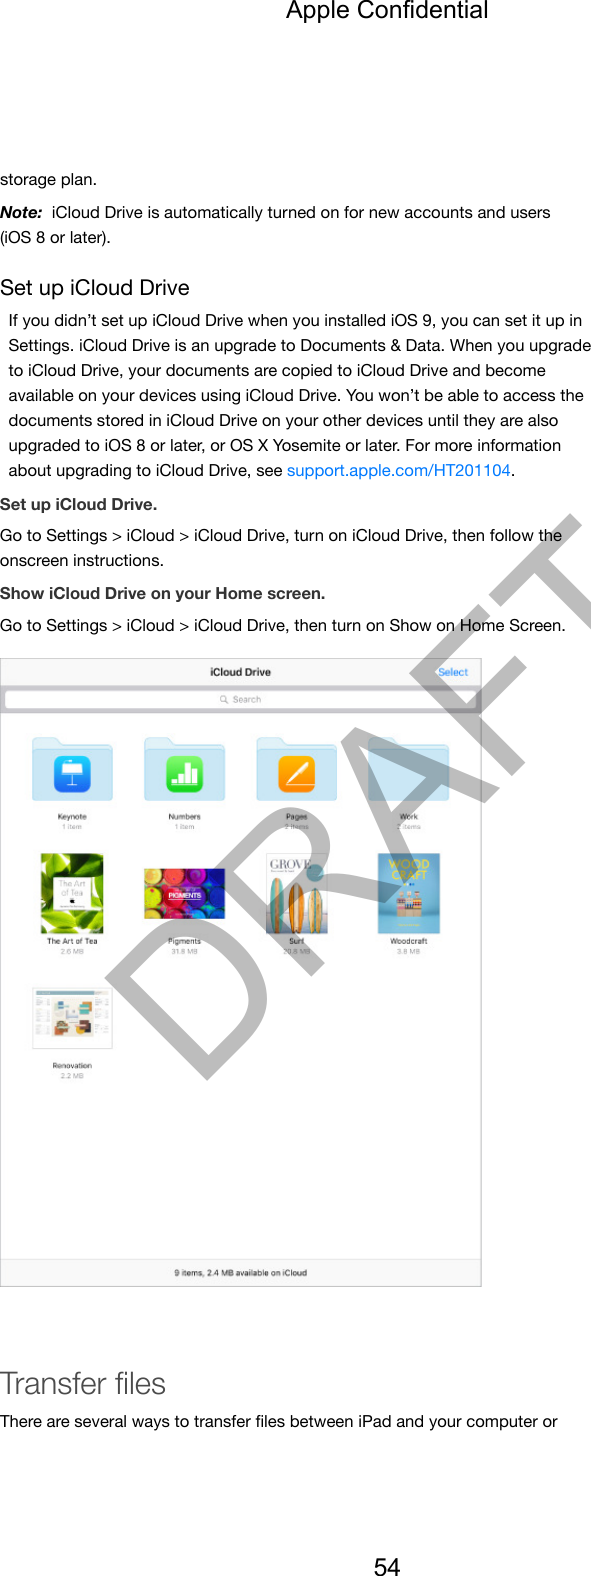 storage plan.Note:  iCloud Drive is automatically turned on for new accounts and users(iOS 8 or later).Set up iCloud DriveIf you didn’t set up iCloud Drive when you installed iOS 9, you can set it up inSettings. iCloud Drive is an upgrade to Documents &amp; Data. When you upgradeto iCloud Drive, your documents are copied to iCloud Drive and becomeavailable on your devices using iCloud Drive. You won’t be able to access thedocuments stored in iCloud Drive on your other devices until they are alsoupgraded to iOS 8 or later, or OS X Yosemite or later. For more informationabout upgrading to iCloud Drive, see support.apple.com/HT201104.Set up iCloud Drive.Go to Settings &gt; iCloud &gt; iCloud Drive, turn on iCloud Drive, then follow theonscreen instructions.Show iCloud Drive on your Home screen.Go to Settings &gt; iCloud &gt; iCloud Drive, then turn on Show on Home Screen.Transfer ﬁlesThere are several ways to transfer ﬁles between iPad and your computer orApple Confidential54DRAFT